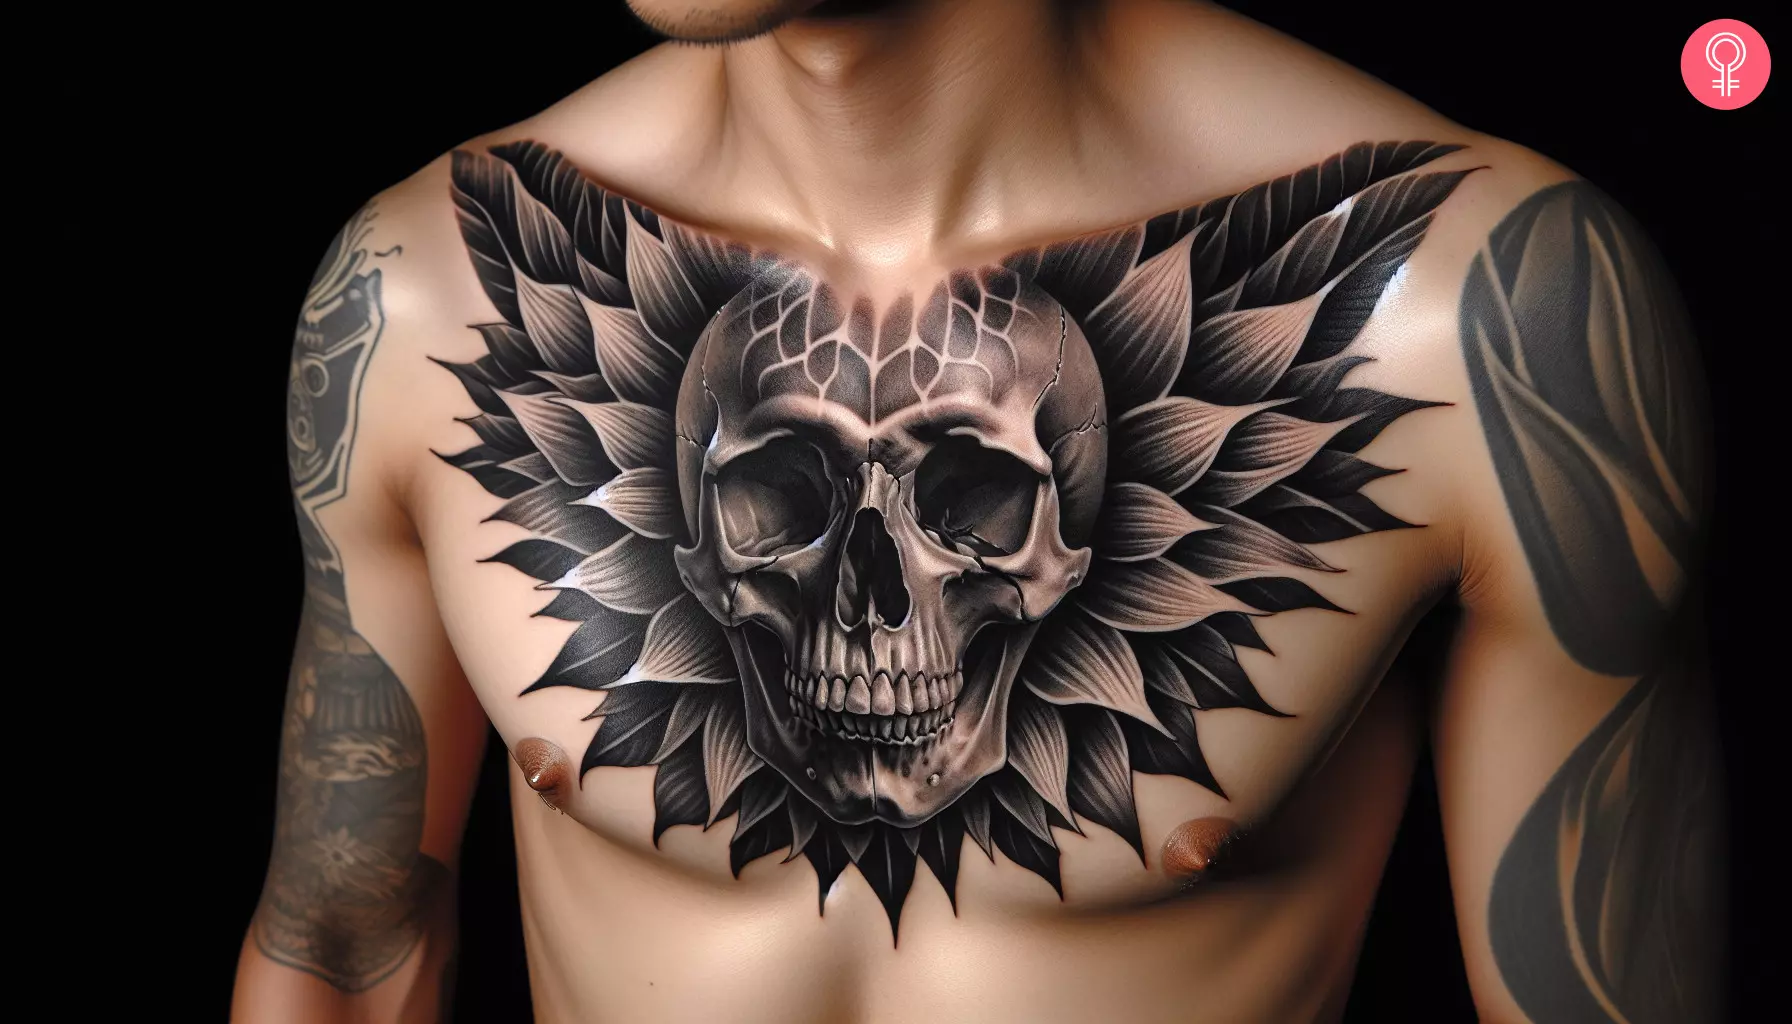 Man with skull tattoo on the chest